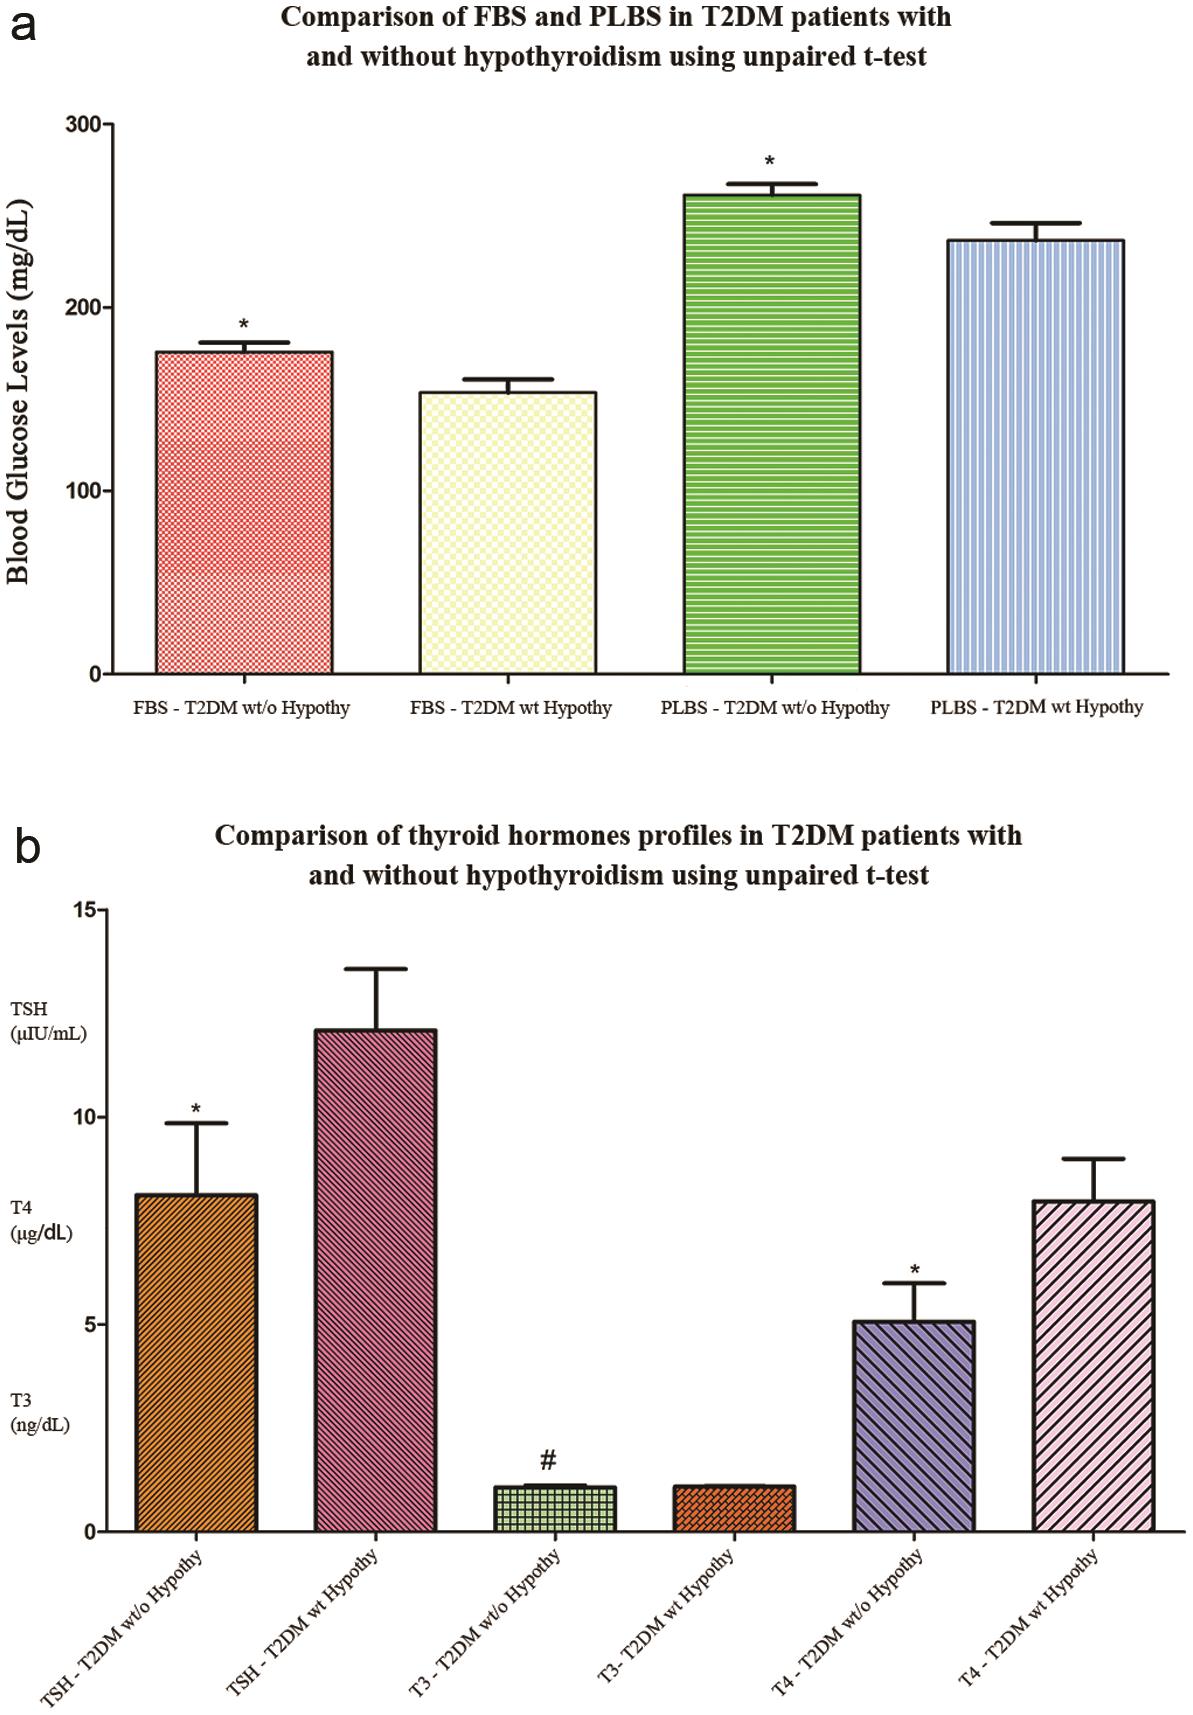 (a) Comparison of FBS and PLBS in T2DM patients with and without hypothyroidism using unpaired <italic>t</italic>-test; (b) Comparison of thyroid hormone profiles in T2DM patients with and without hypothyroidism using unpaired <italic>t</italic>-test.